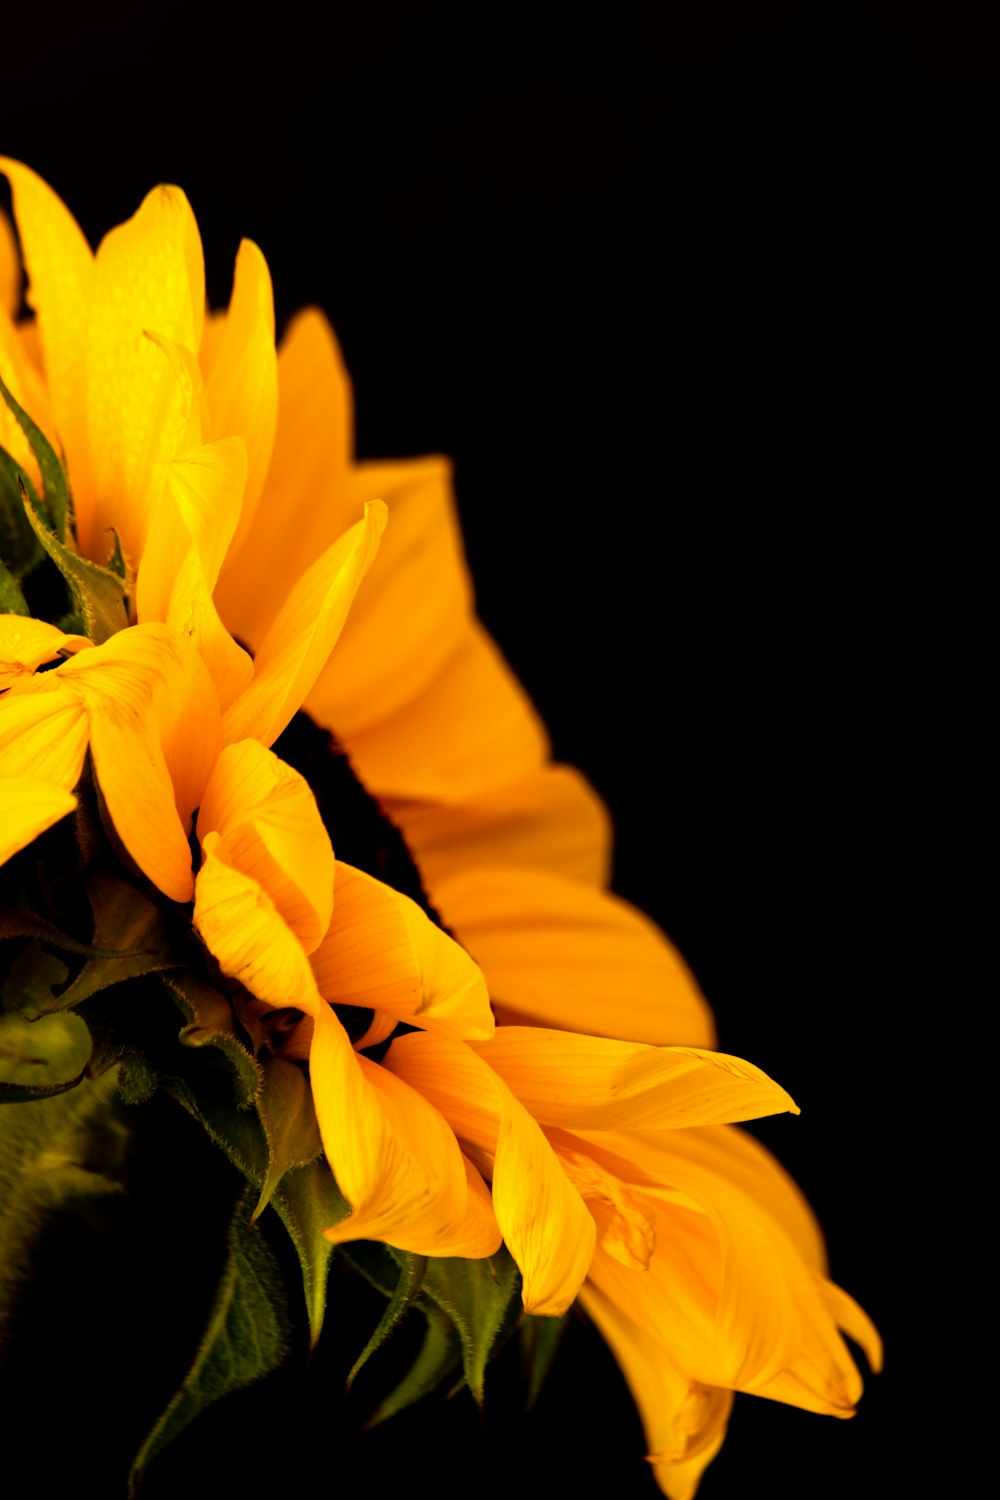 a close up of a sunflower on a black background